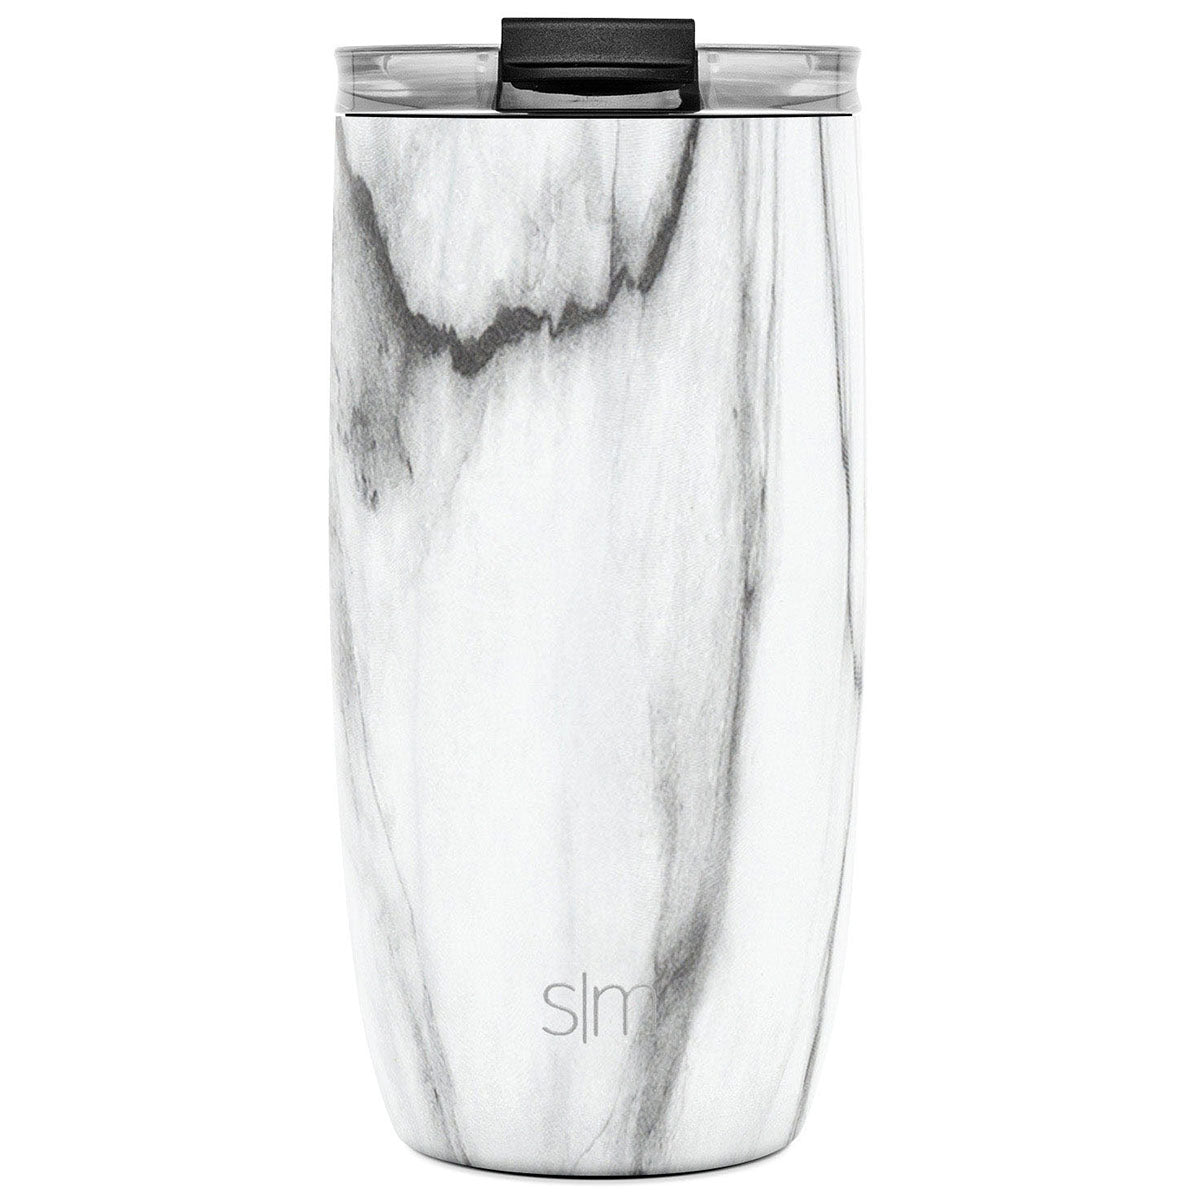 Simple Modern Voyager 16oz Stainless Steel Travel Mug with Insulated Flip Lid Powder Coat Black